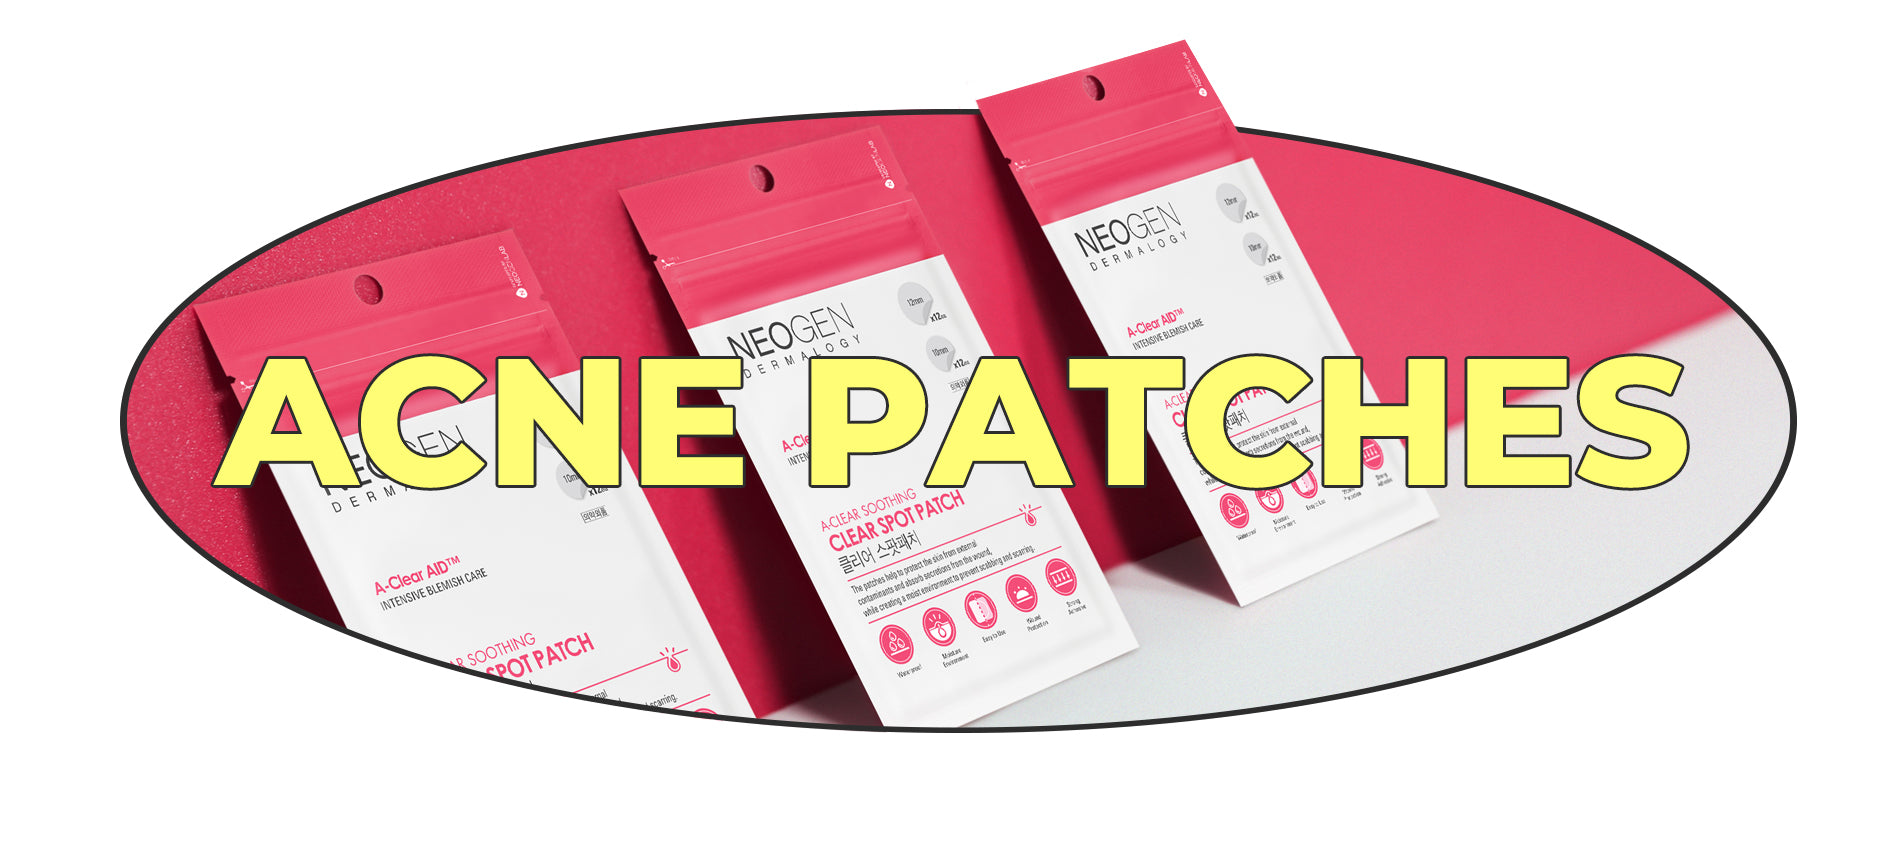 ACNE PATCHES